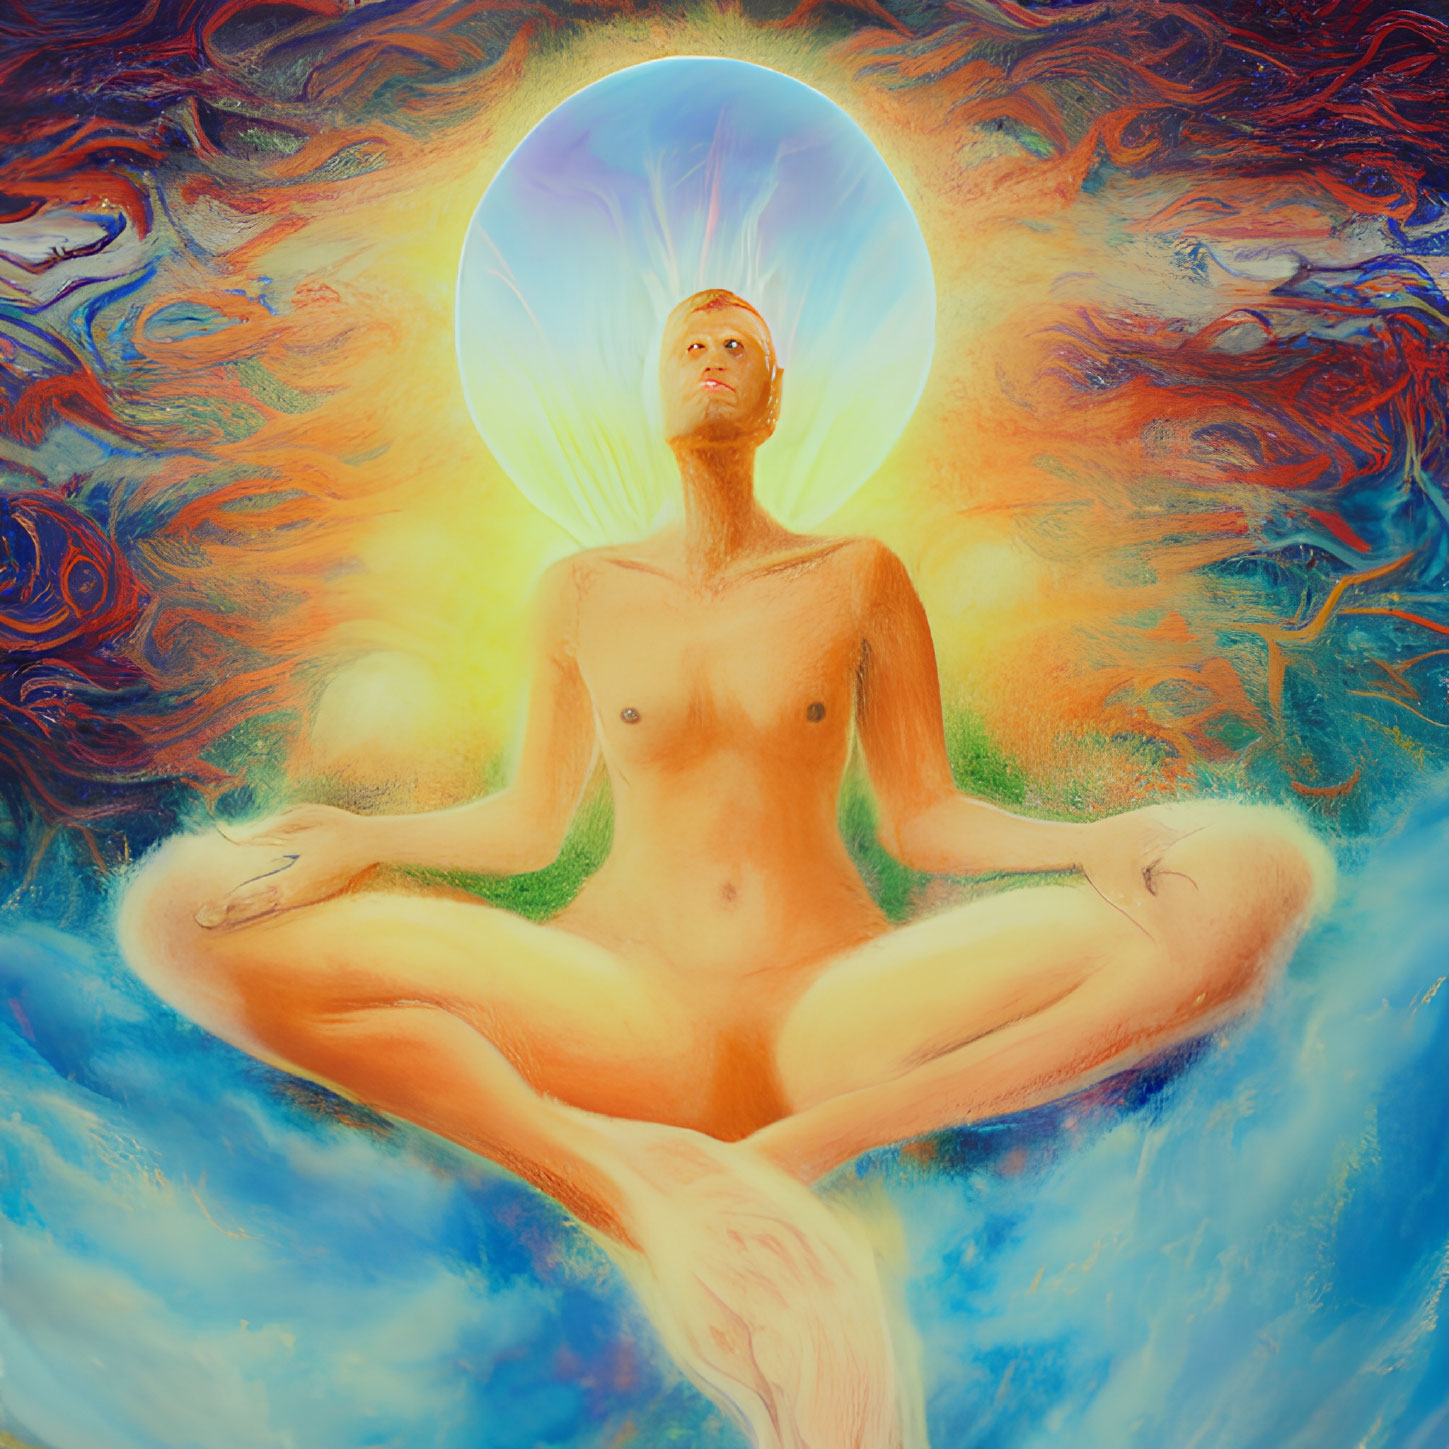 Glowing bald figure meditating with radiant orb in abstract painting